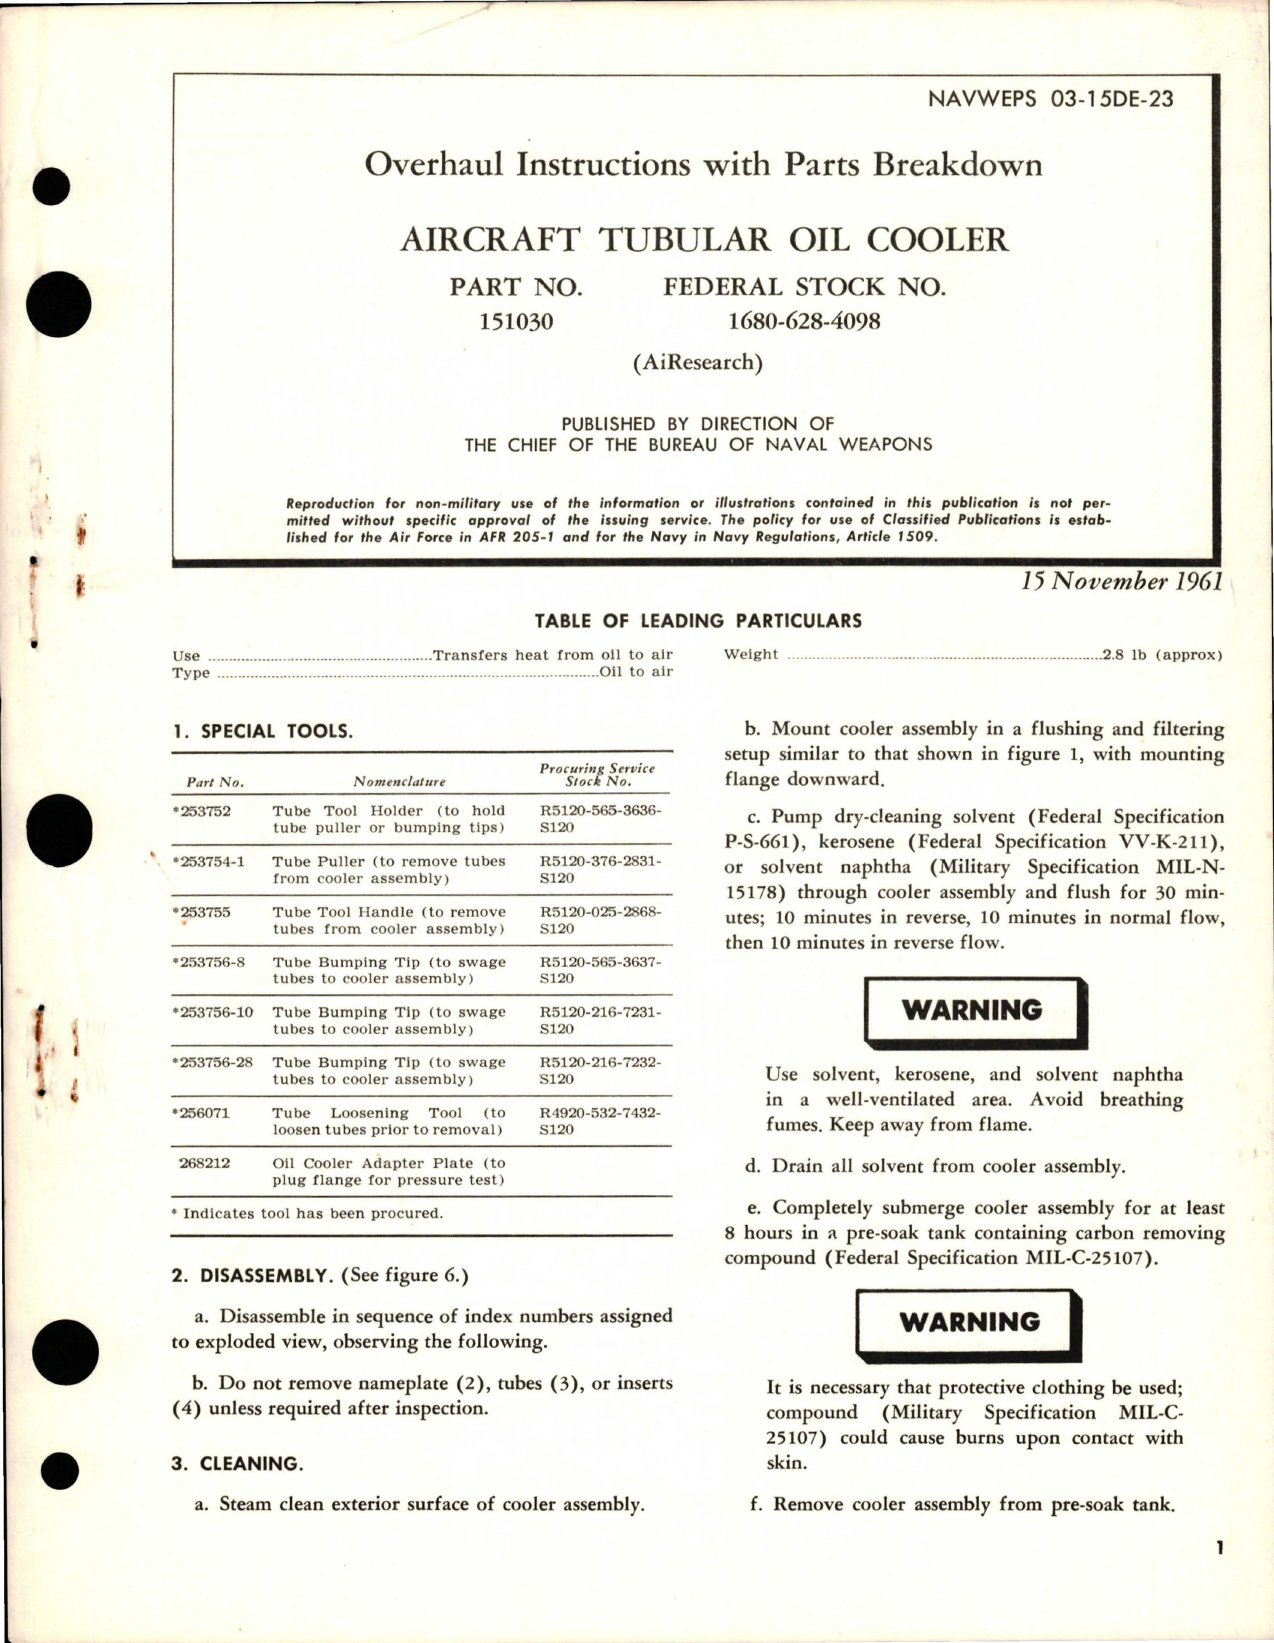 Sample page 1 from AirCorps Library document: Overhaul Instructions with Parts Breakdown for Tubular Oil Cooler - Part 151030